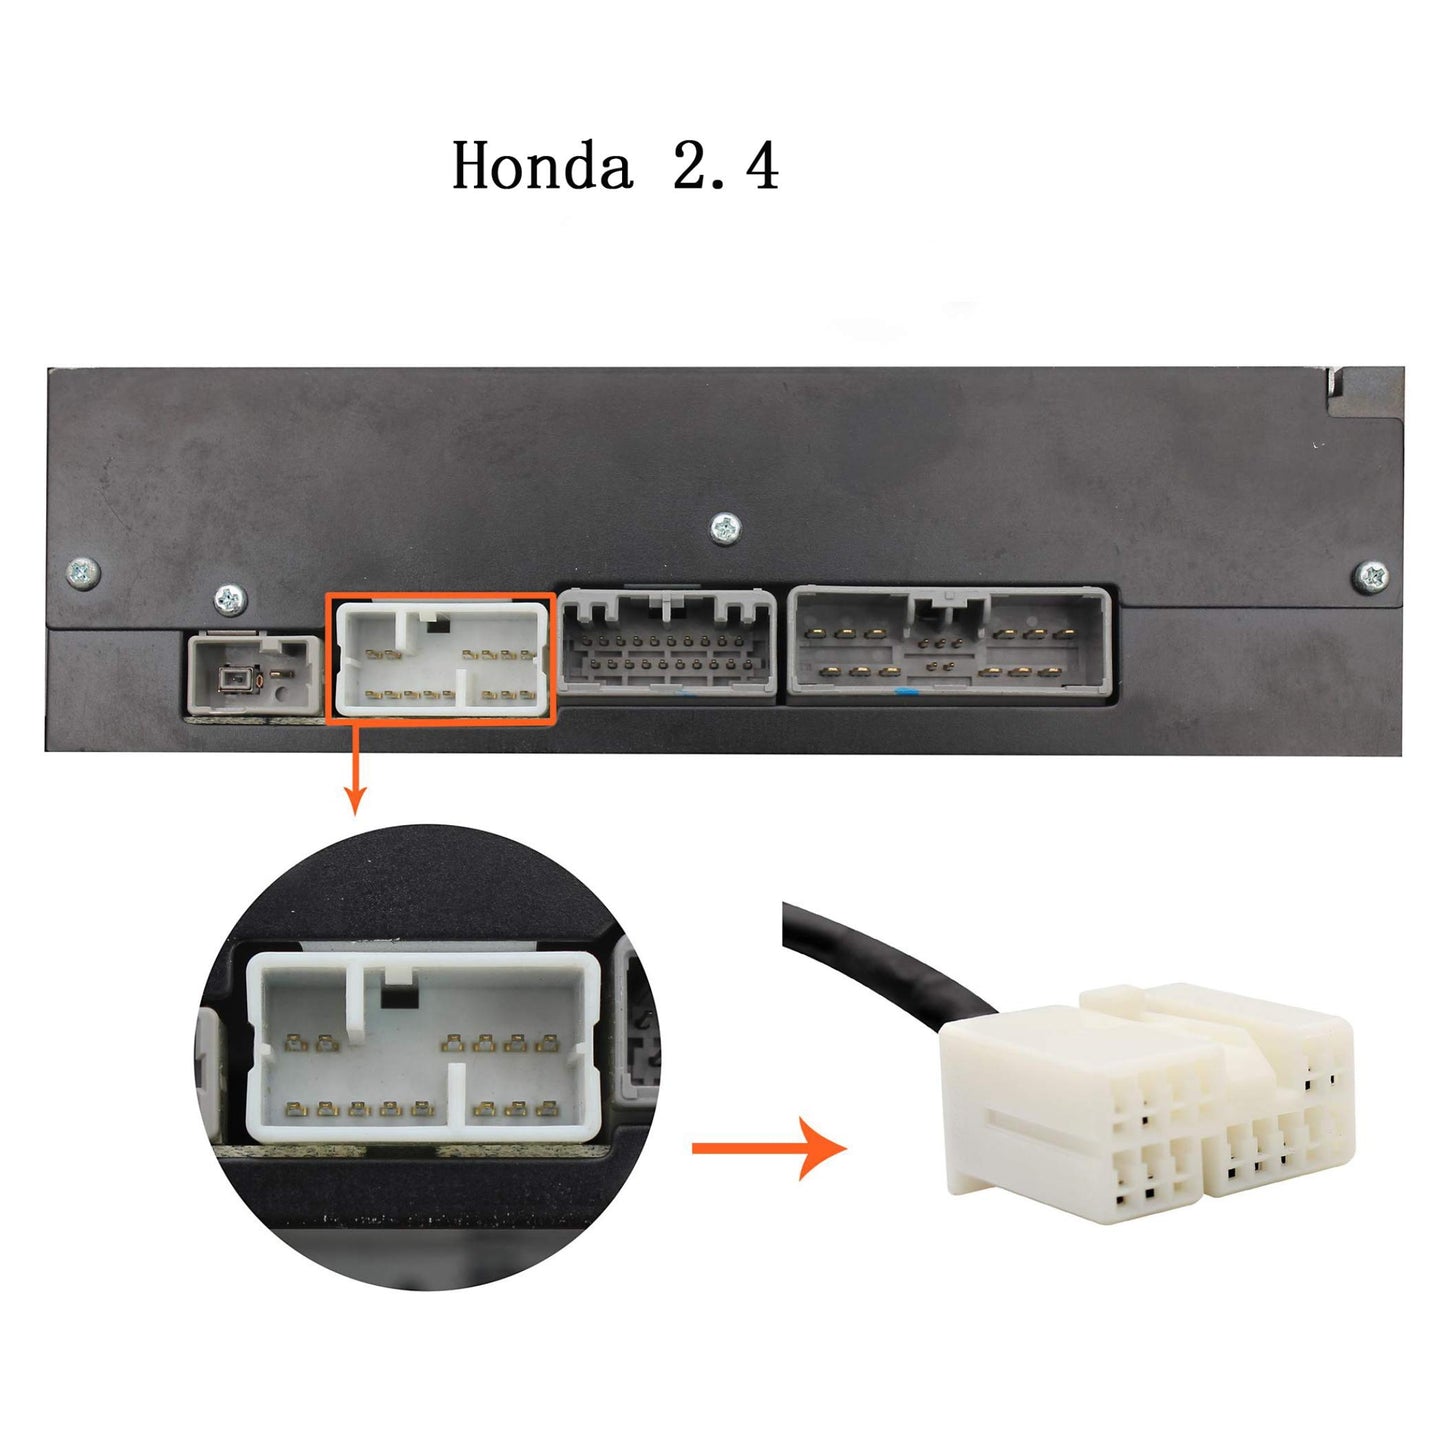 Aux Adapter,Yomikoo USB AUX in Adapter Car Stereo Digital Cd Changer 3.5mm Aux Interface for Honda 2.4 2003-2011 Accord 2002-2011 City 2005-2011 CRV 2006-2011 Civic 2005-2011 Odyssey 2002-2011 Fit